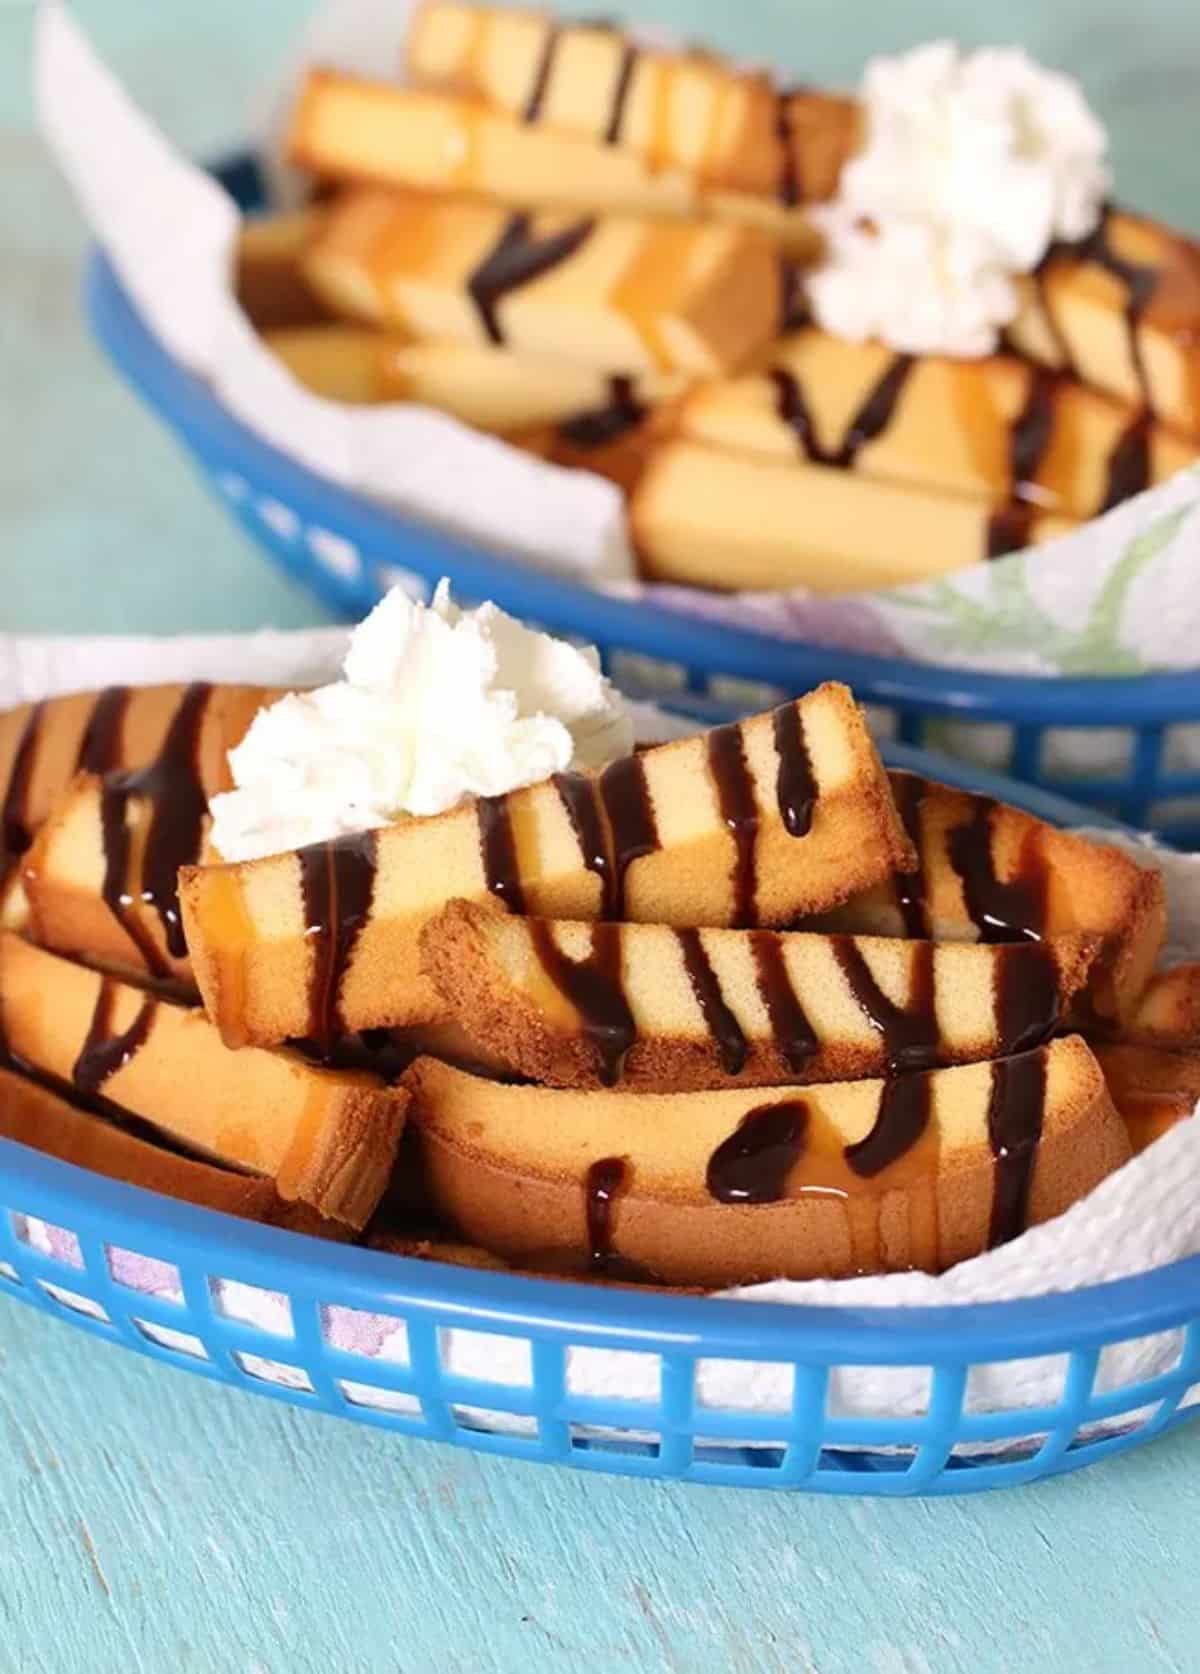 Scrumptious chocolate and caramel pound cake fries in baskets.